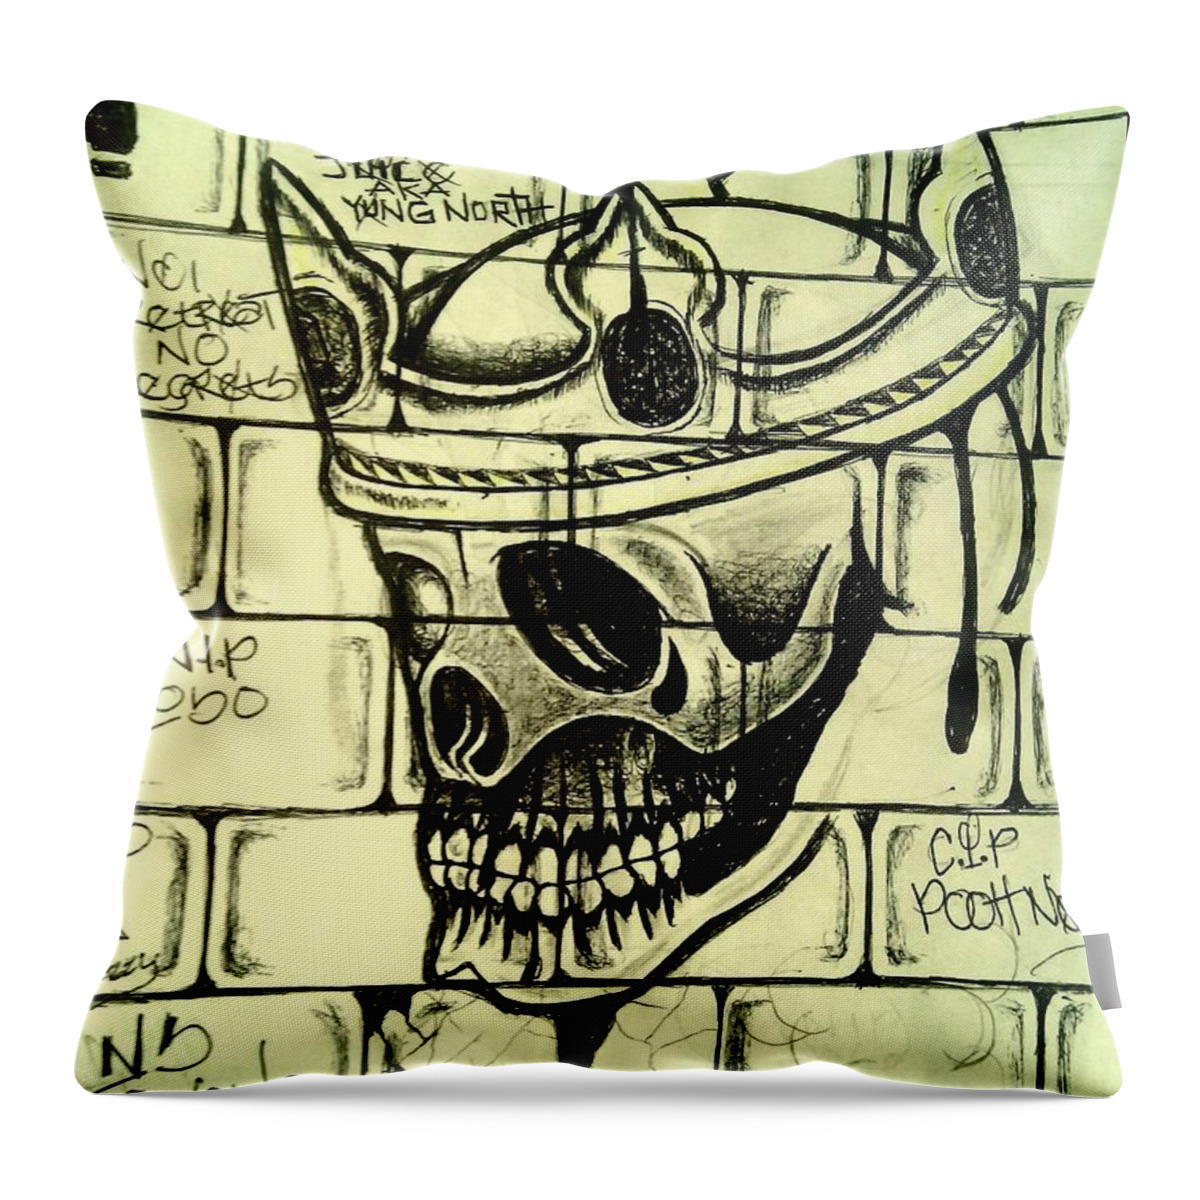 Black Art Throw Pillow featuring the drawing Untitled 4 by A S 